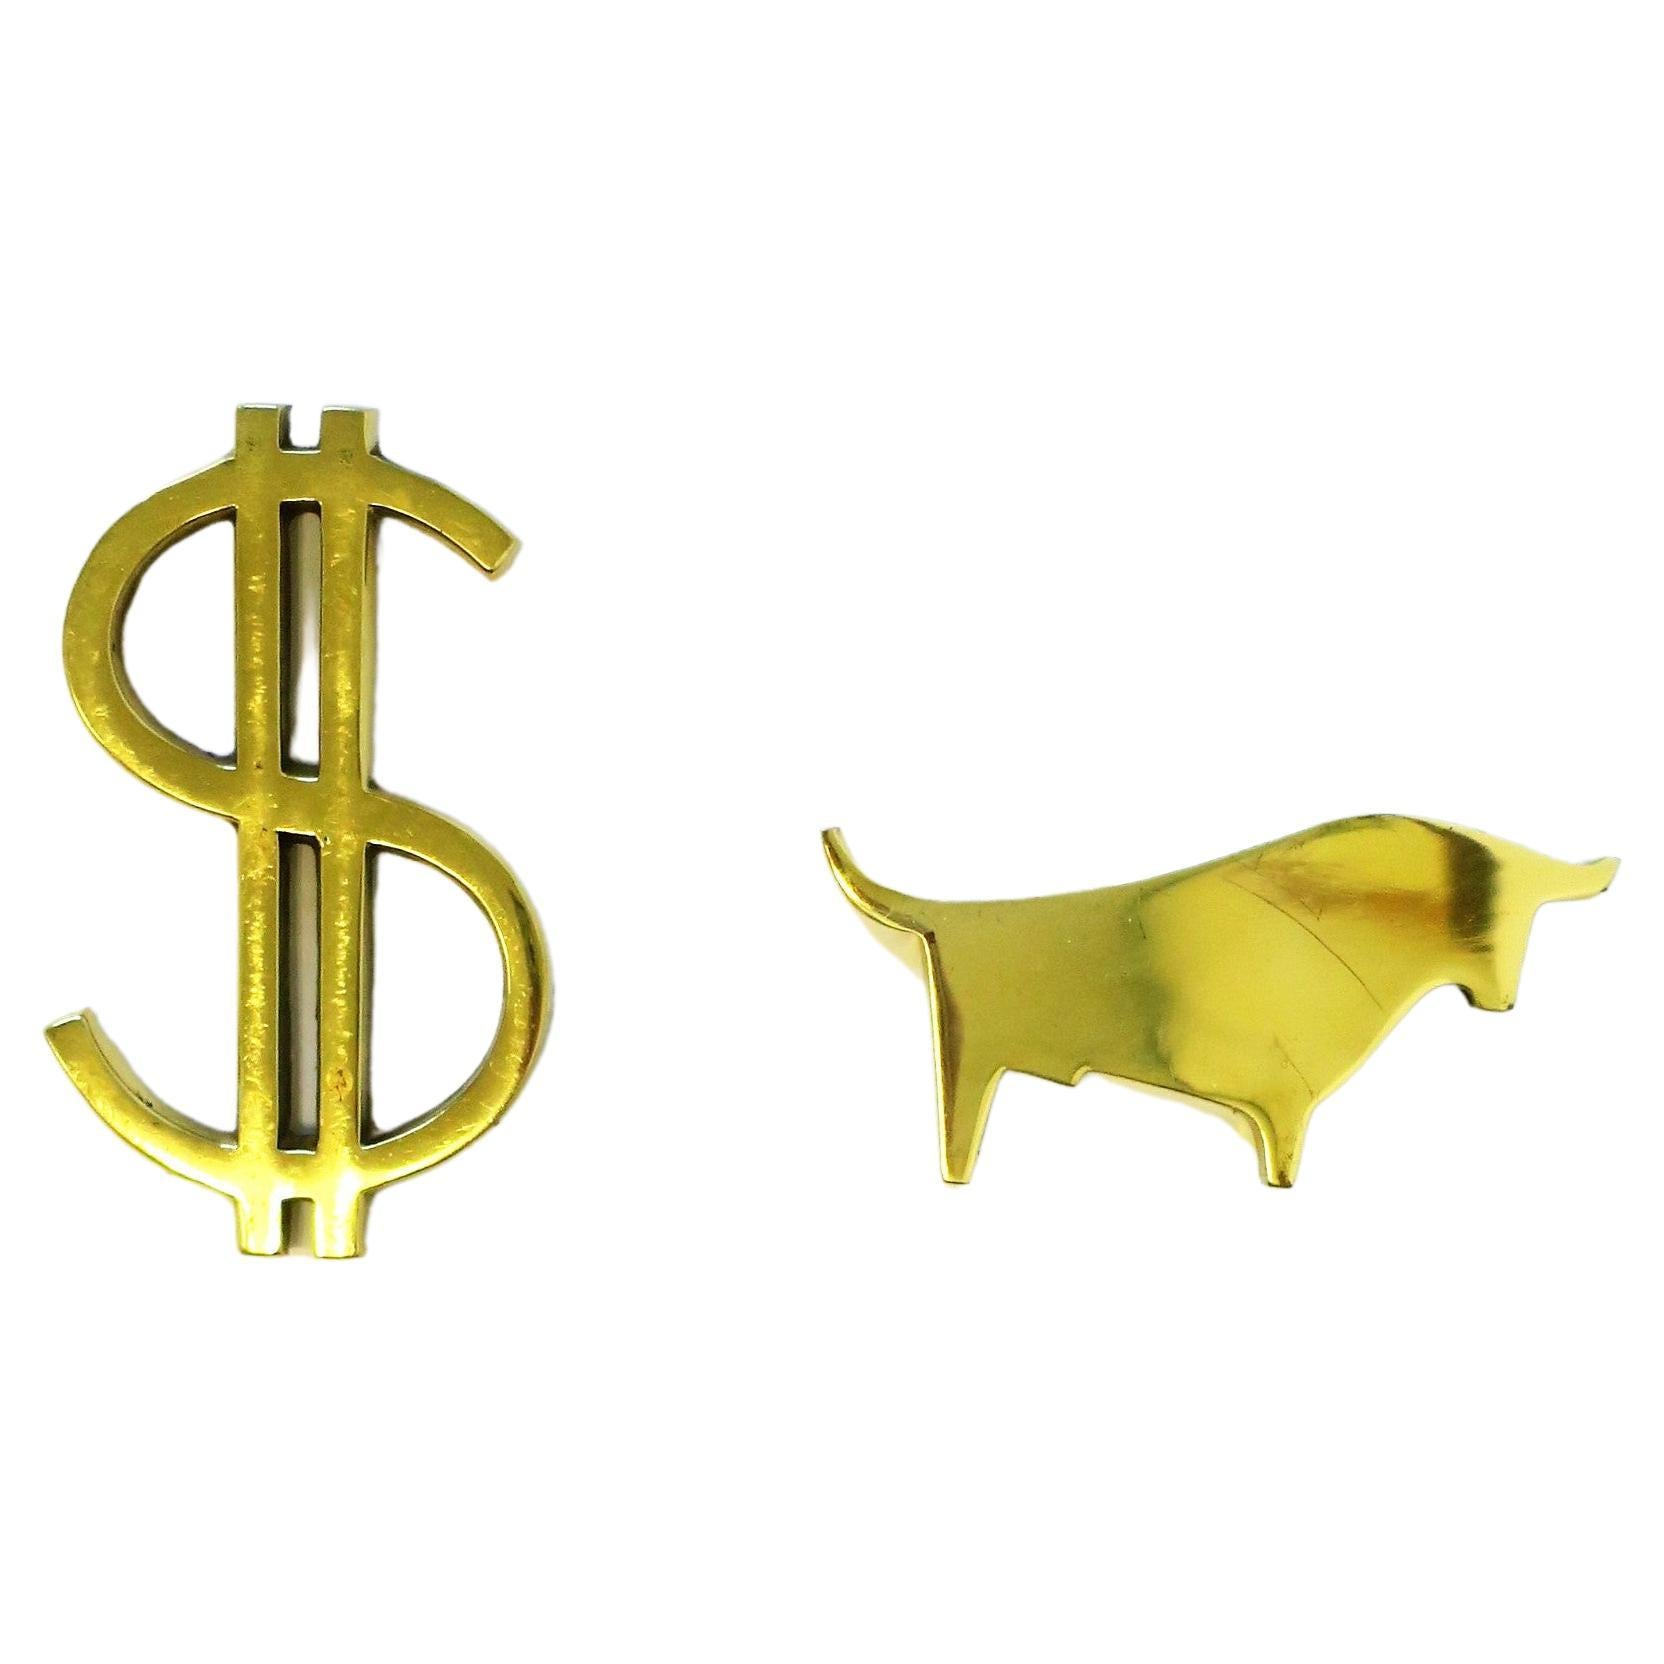 A set of Wall Street brass paperweights or decorative objects; a brass dollar sign and bull, circa mid to late-20th century. Great desk accessories. 

Dimensions: 
Dollar sign: 2.82